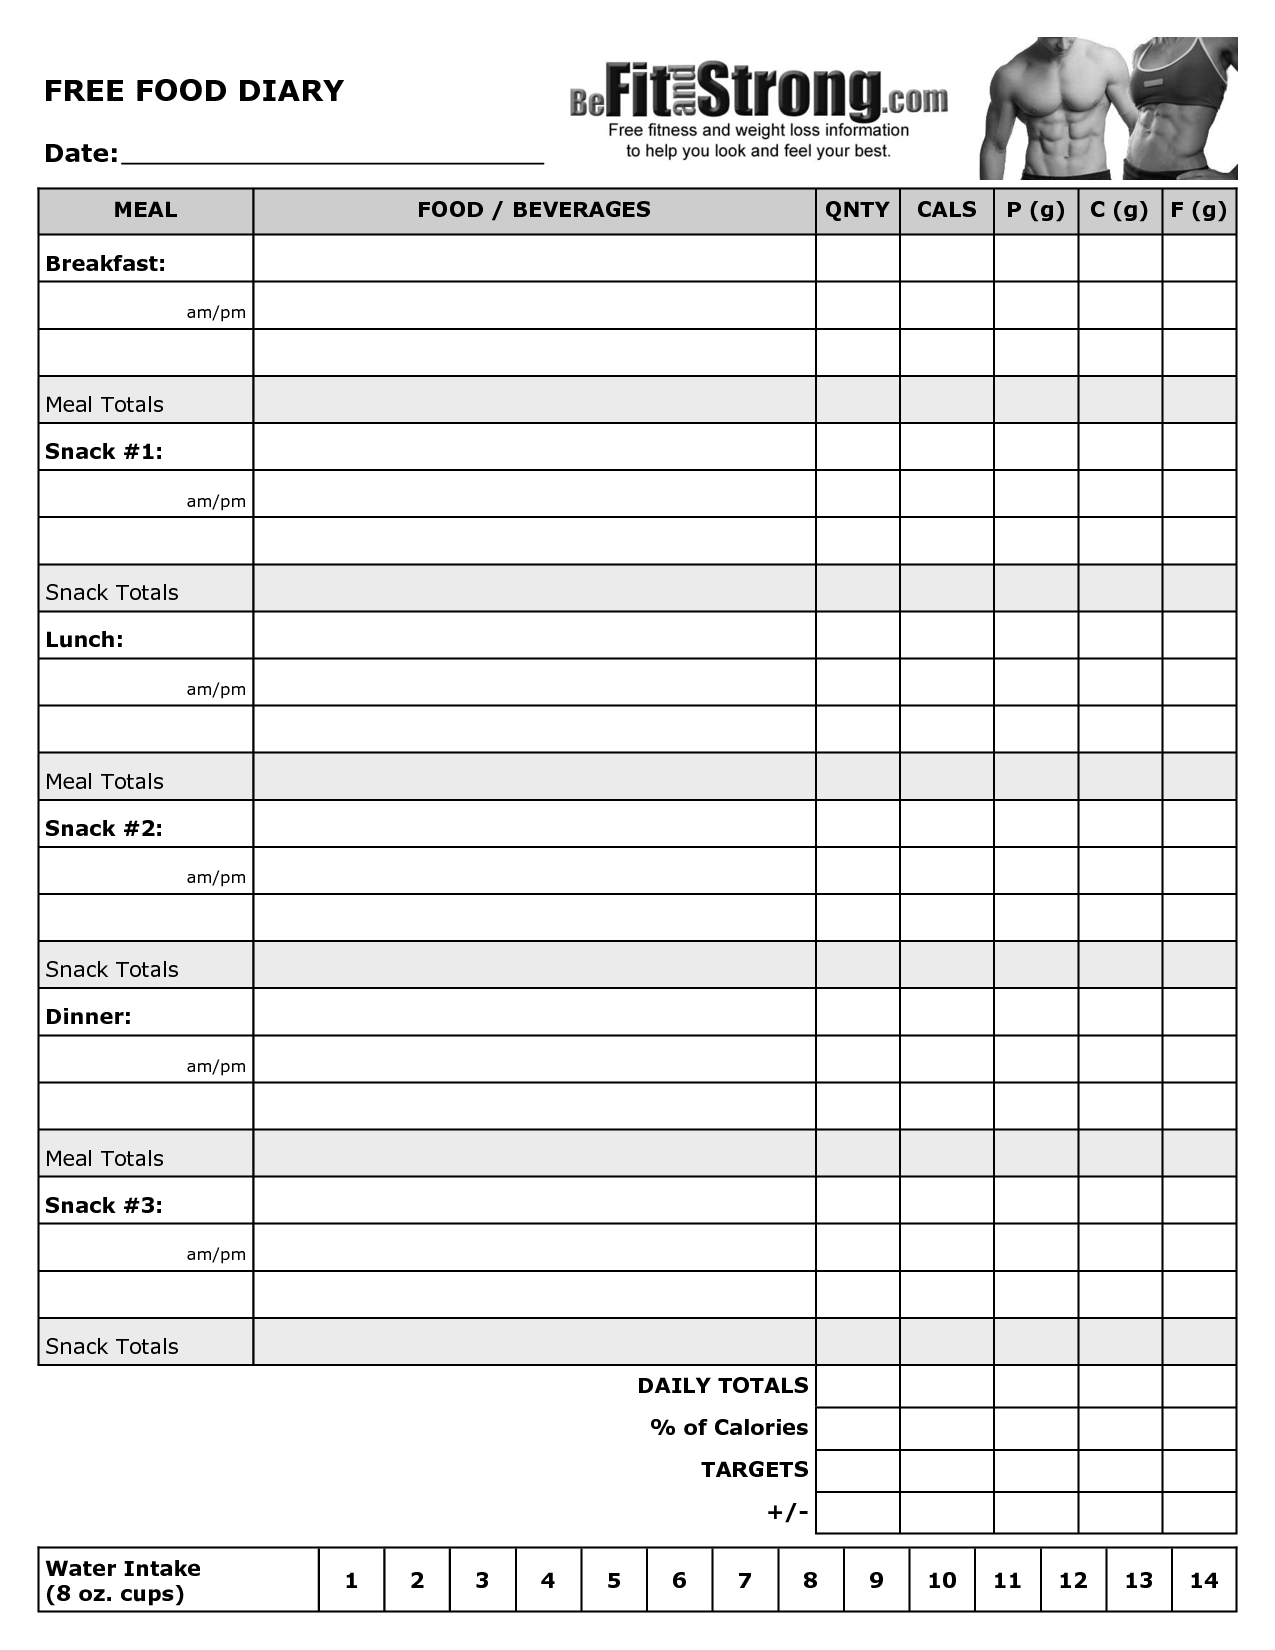 Free Printable Food Diary Template | Health, Fitness &amp; Weight Loss | Free Printable Calorie Counter Worksheet